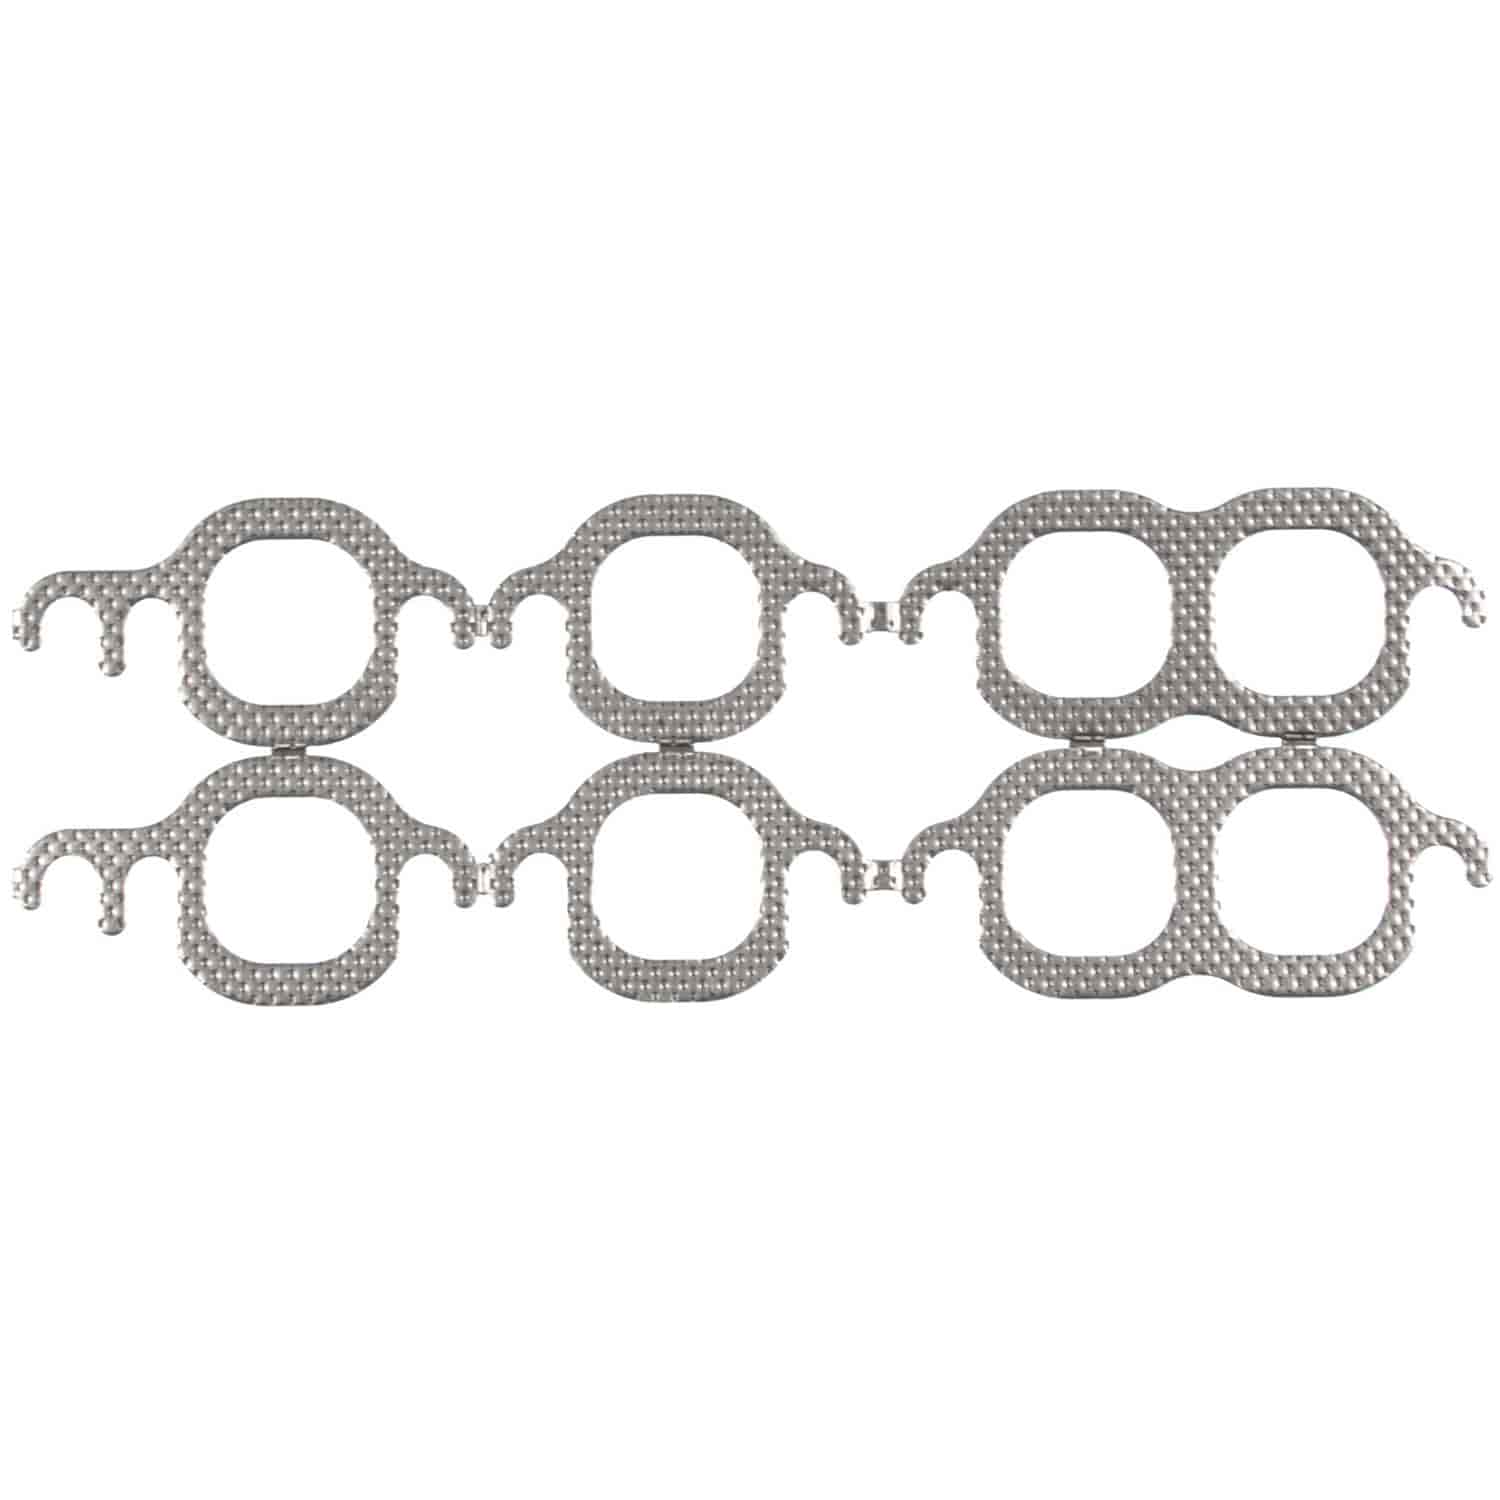 Exhaust Manifold Gasket Set 1955-1995 Small Block Chevy V8 265/267/283/305/307/327/350/400